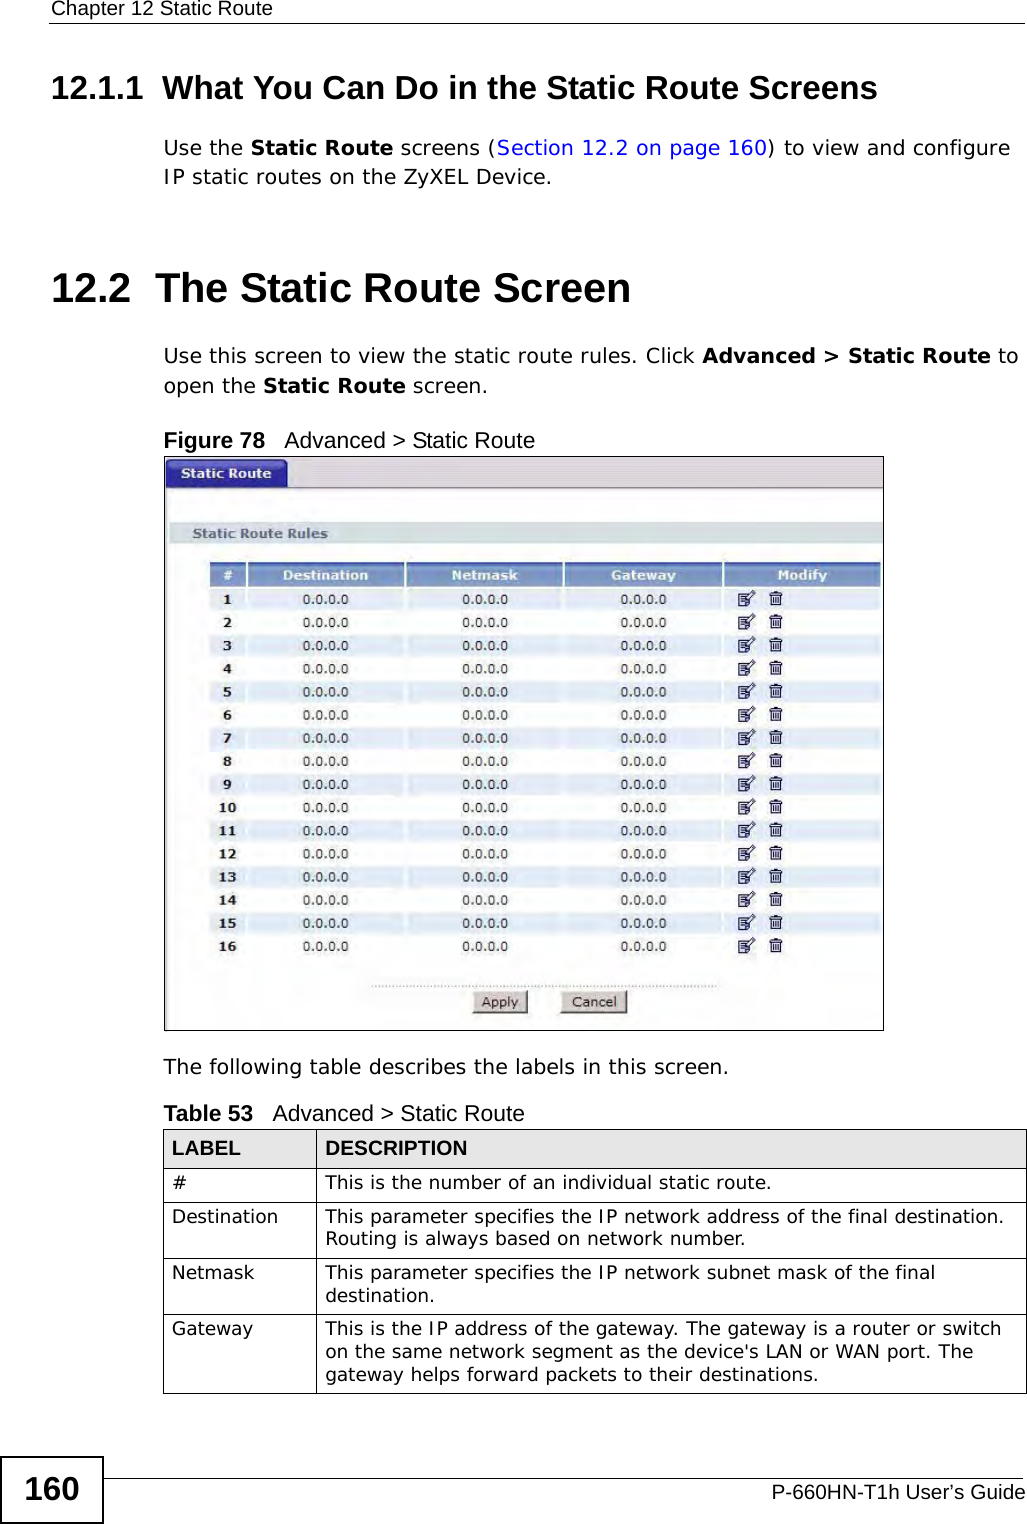 Chapter 12 Static RouteP-660HN-T1h User’s Guide16012.1.1  What You Can Do in the Static Route ScreensUse the Static Route screens (Section 12.2 on page 160) to view and configure IP static routes on the ZyXEL Device.12.2  The Static Route ScreenUse this screen to view the static route rules. Click Advanced &gt; Static Route to open the Static Route screen.Figure 78   Advanced &gt; Static RouteThe following table describes the labels in this screen. Table 53   Advanced &gt; Static RouteLABEL DESCRIPTION#This is the number of an individual static route.Destination This parameter specifies the IP network address of the final destination. Routing is always based on network number. Netmask This parameter specifies the IP network subnet mask of the final destination.Gateway This is the IP address of the gateway. The gateway is a router or switch on the same network segment as the device&apos;s LAN or WAN port. The gateway helps forward packets to their destinations.